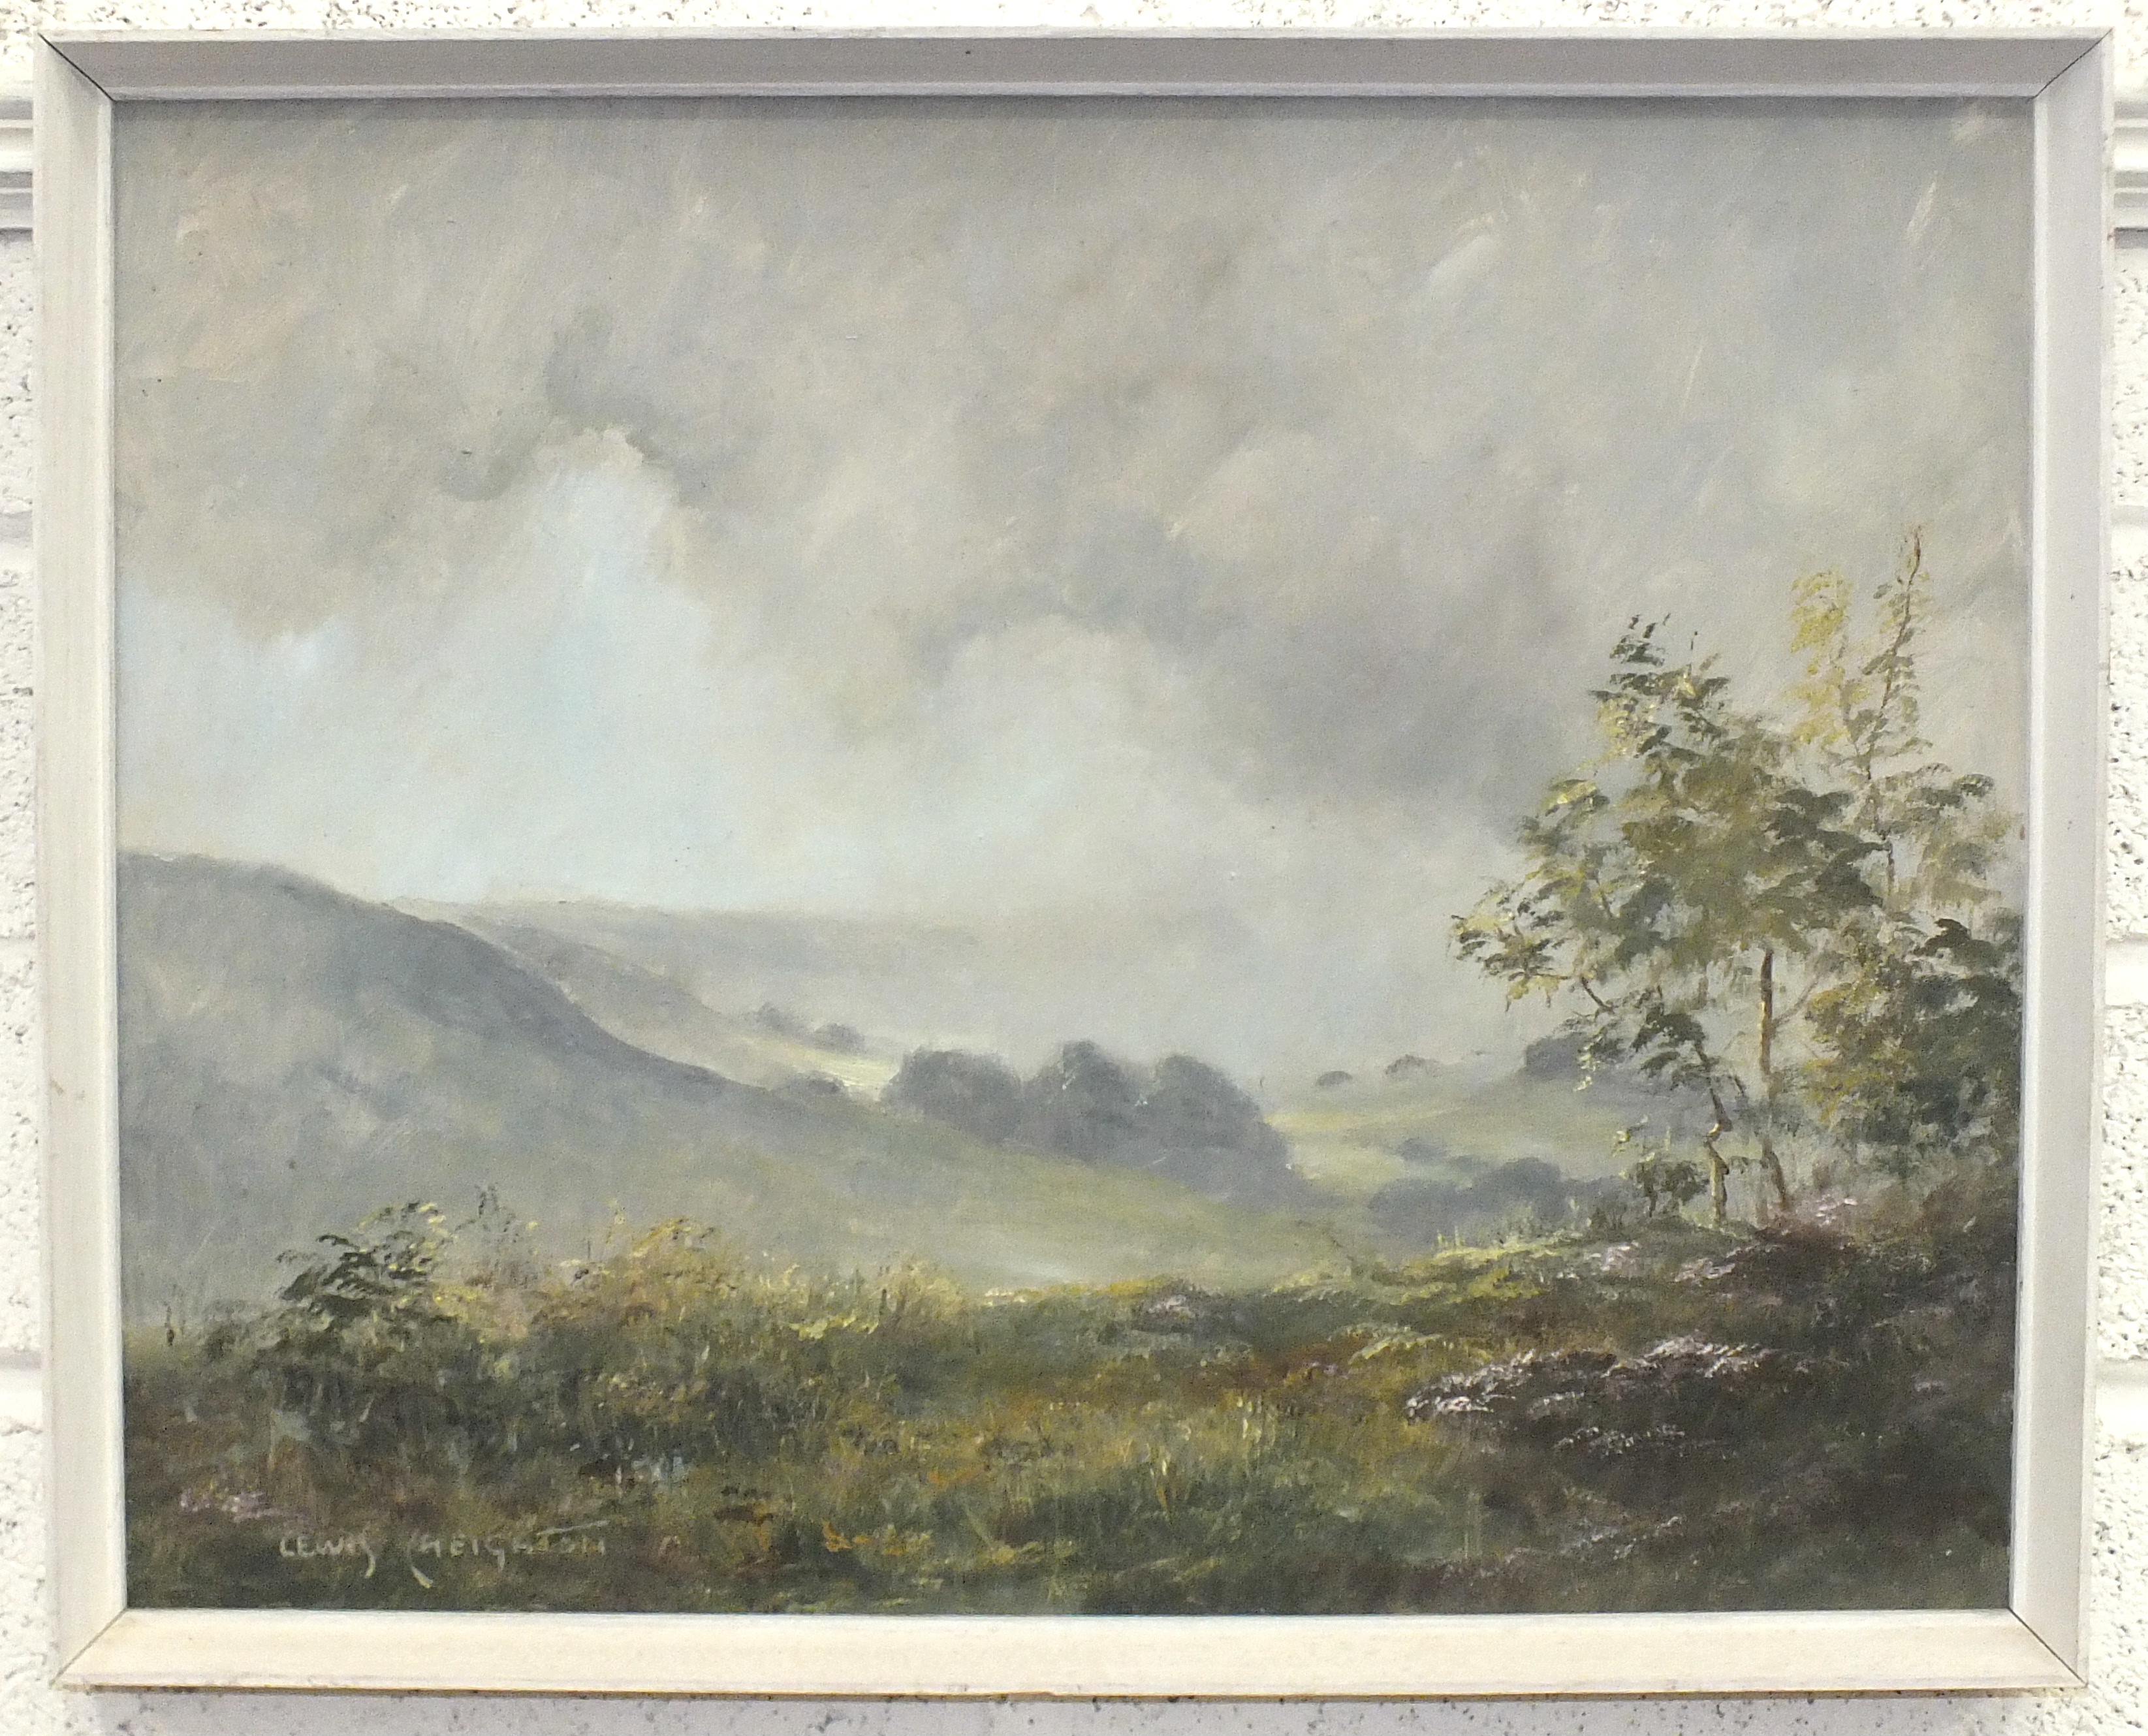 Lewis Creighton, 'Moorland Scene', signed oil on board, 39.5 x 49.5cm, together with a limited